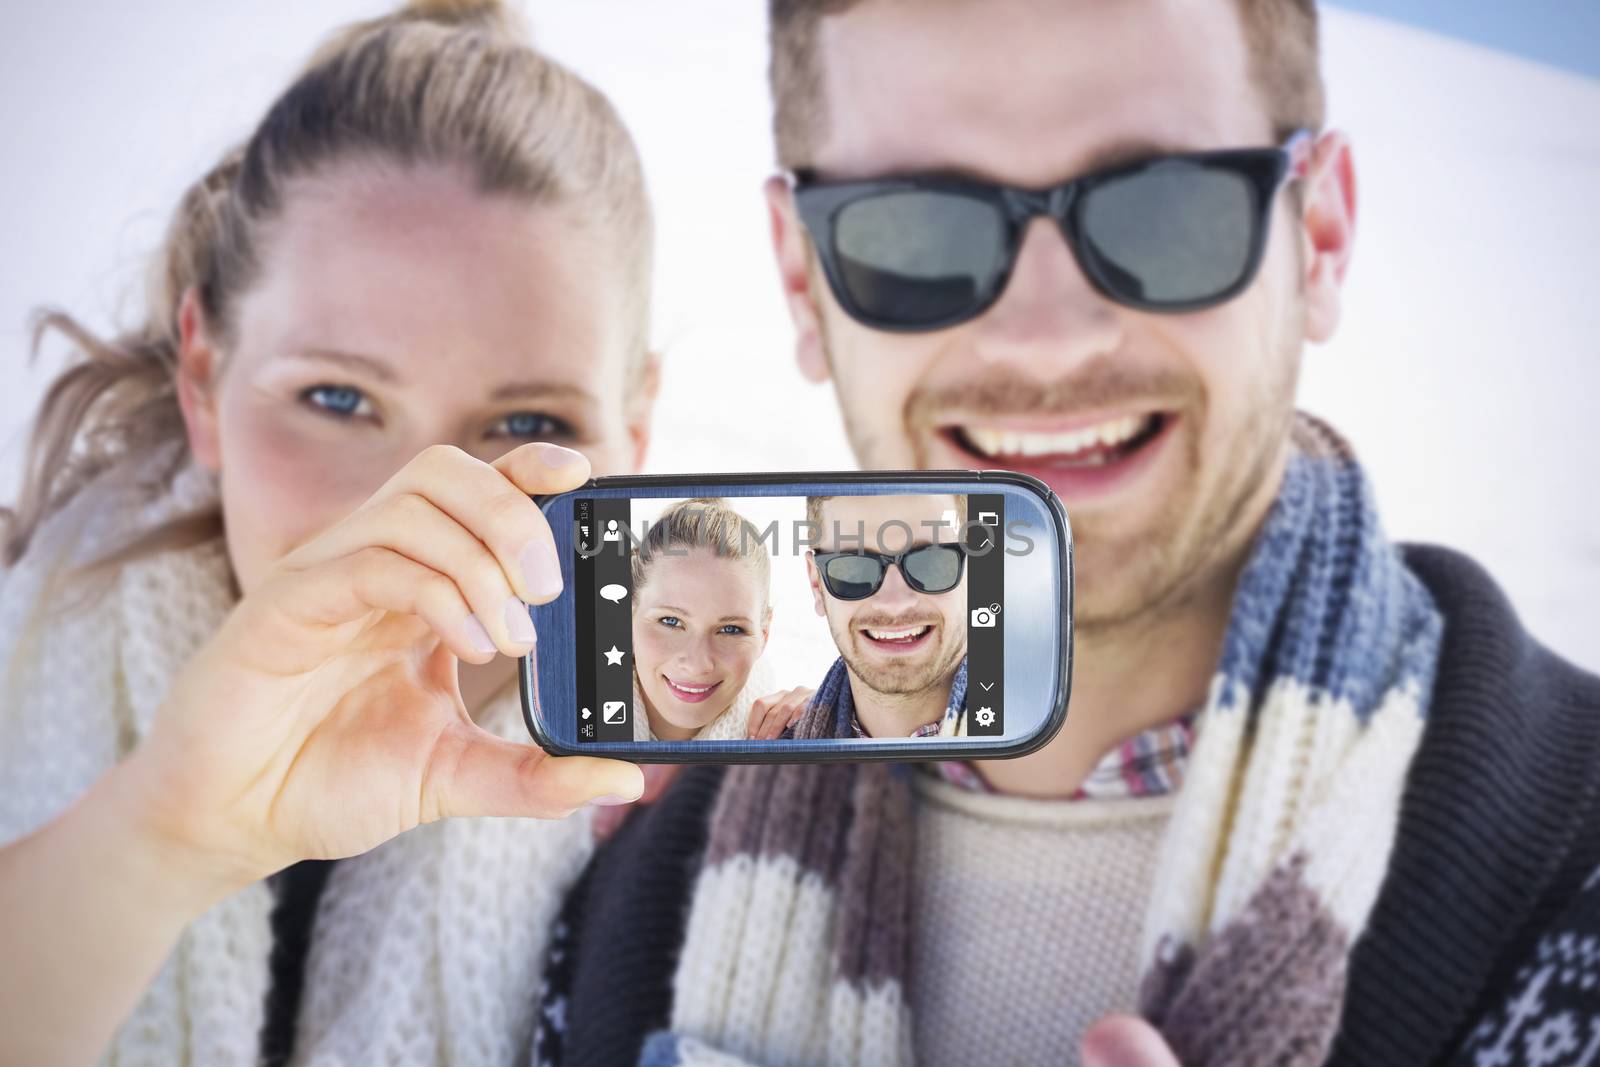 Hand holding smartphone showing against smiling couple in warm clothing on snow covered landscape